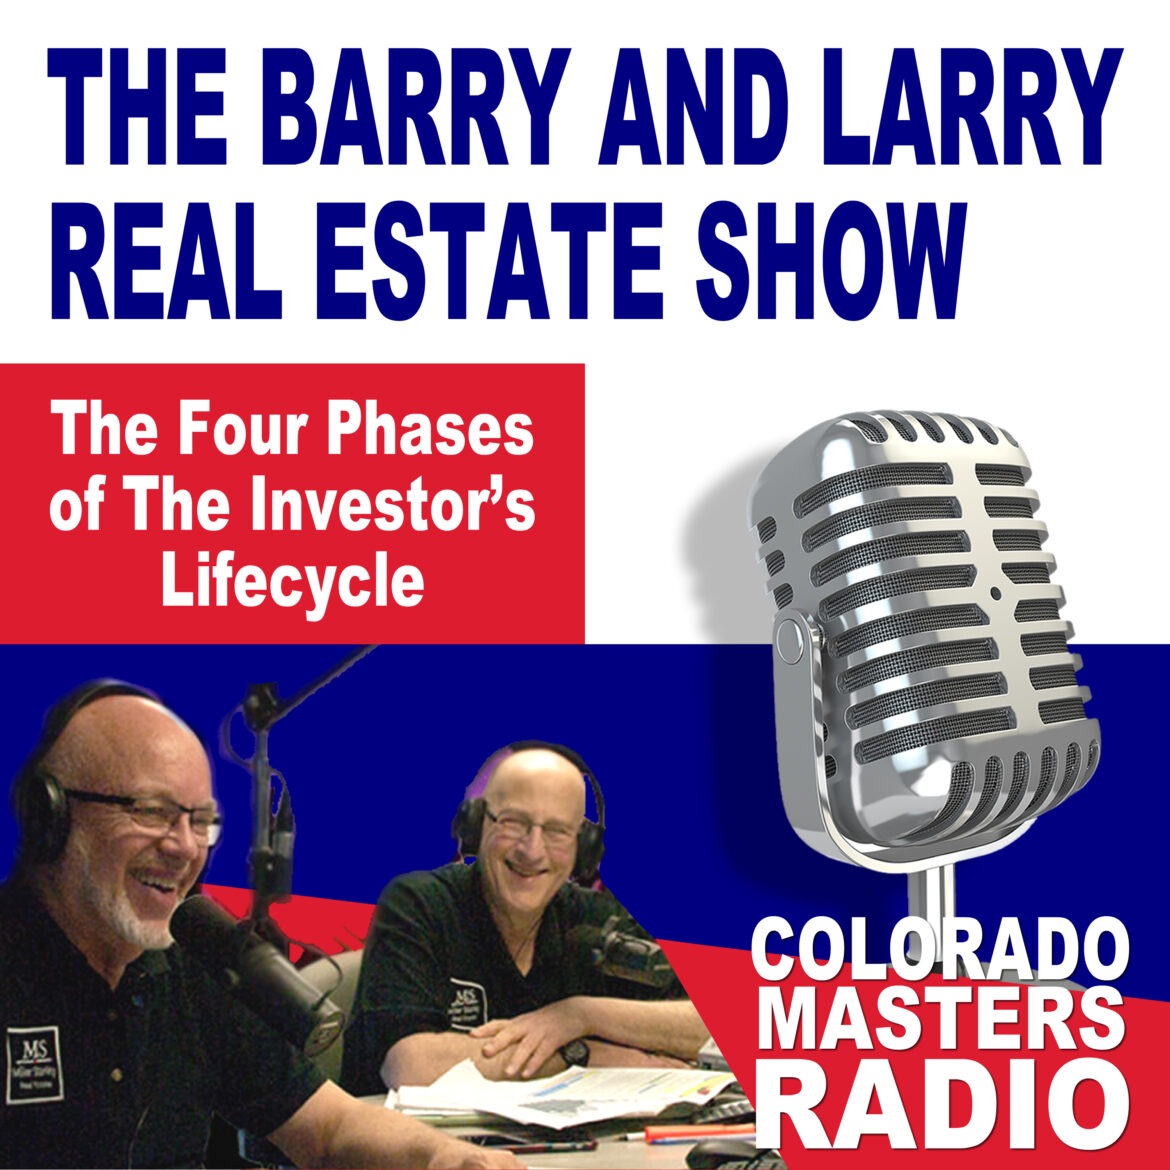 The Larry and Barry Real Estate Show - The Four Phases of the Investors Lifecycle